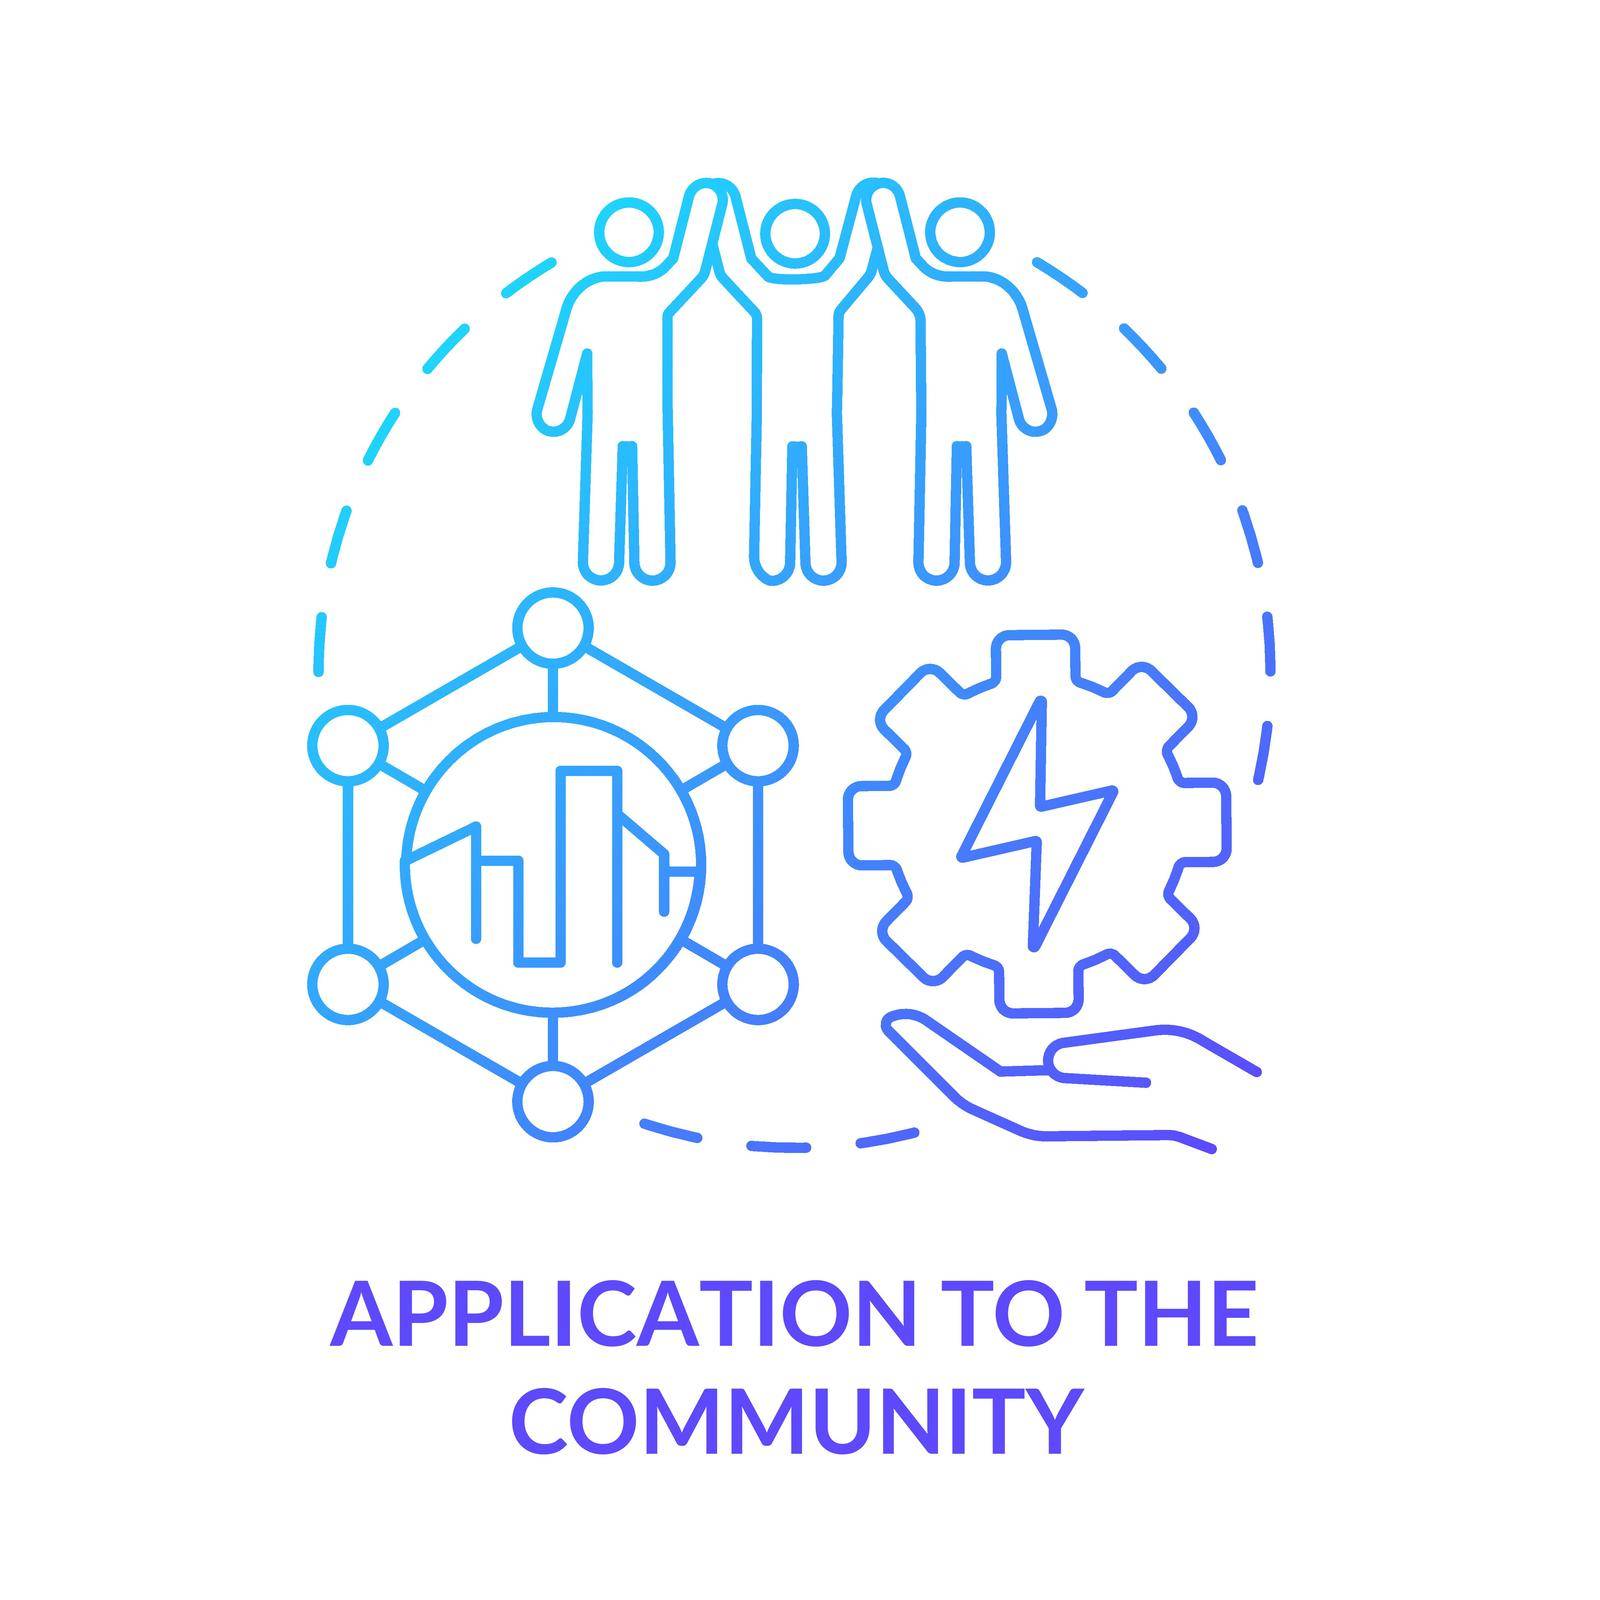 Application to community blue gradient concept icon by bsd